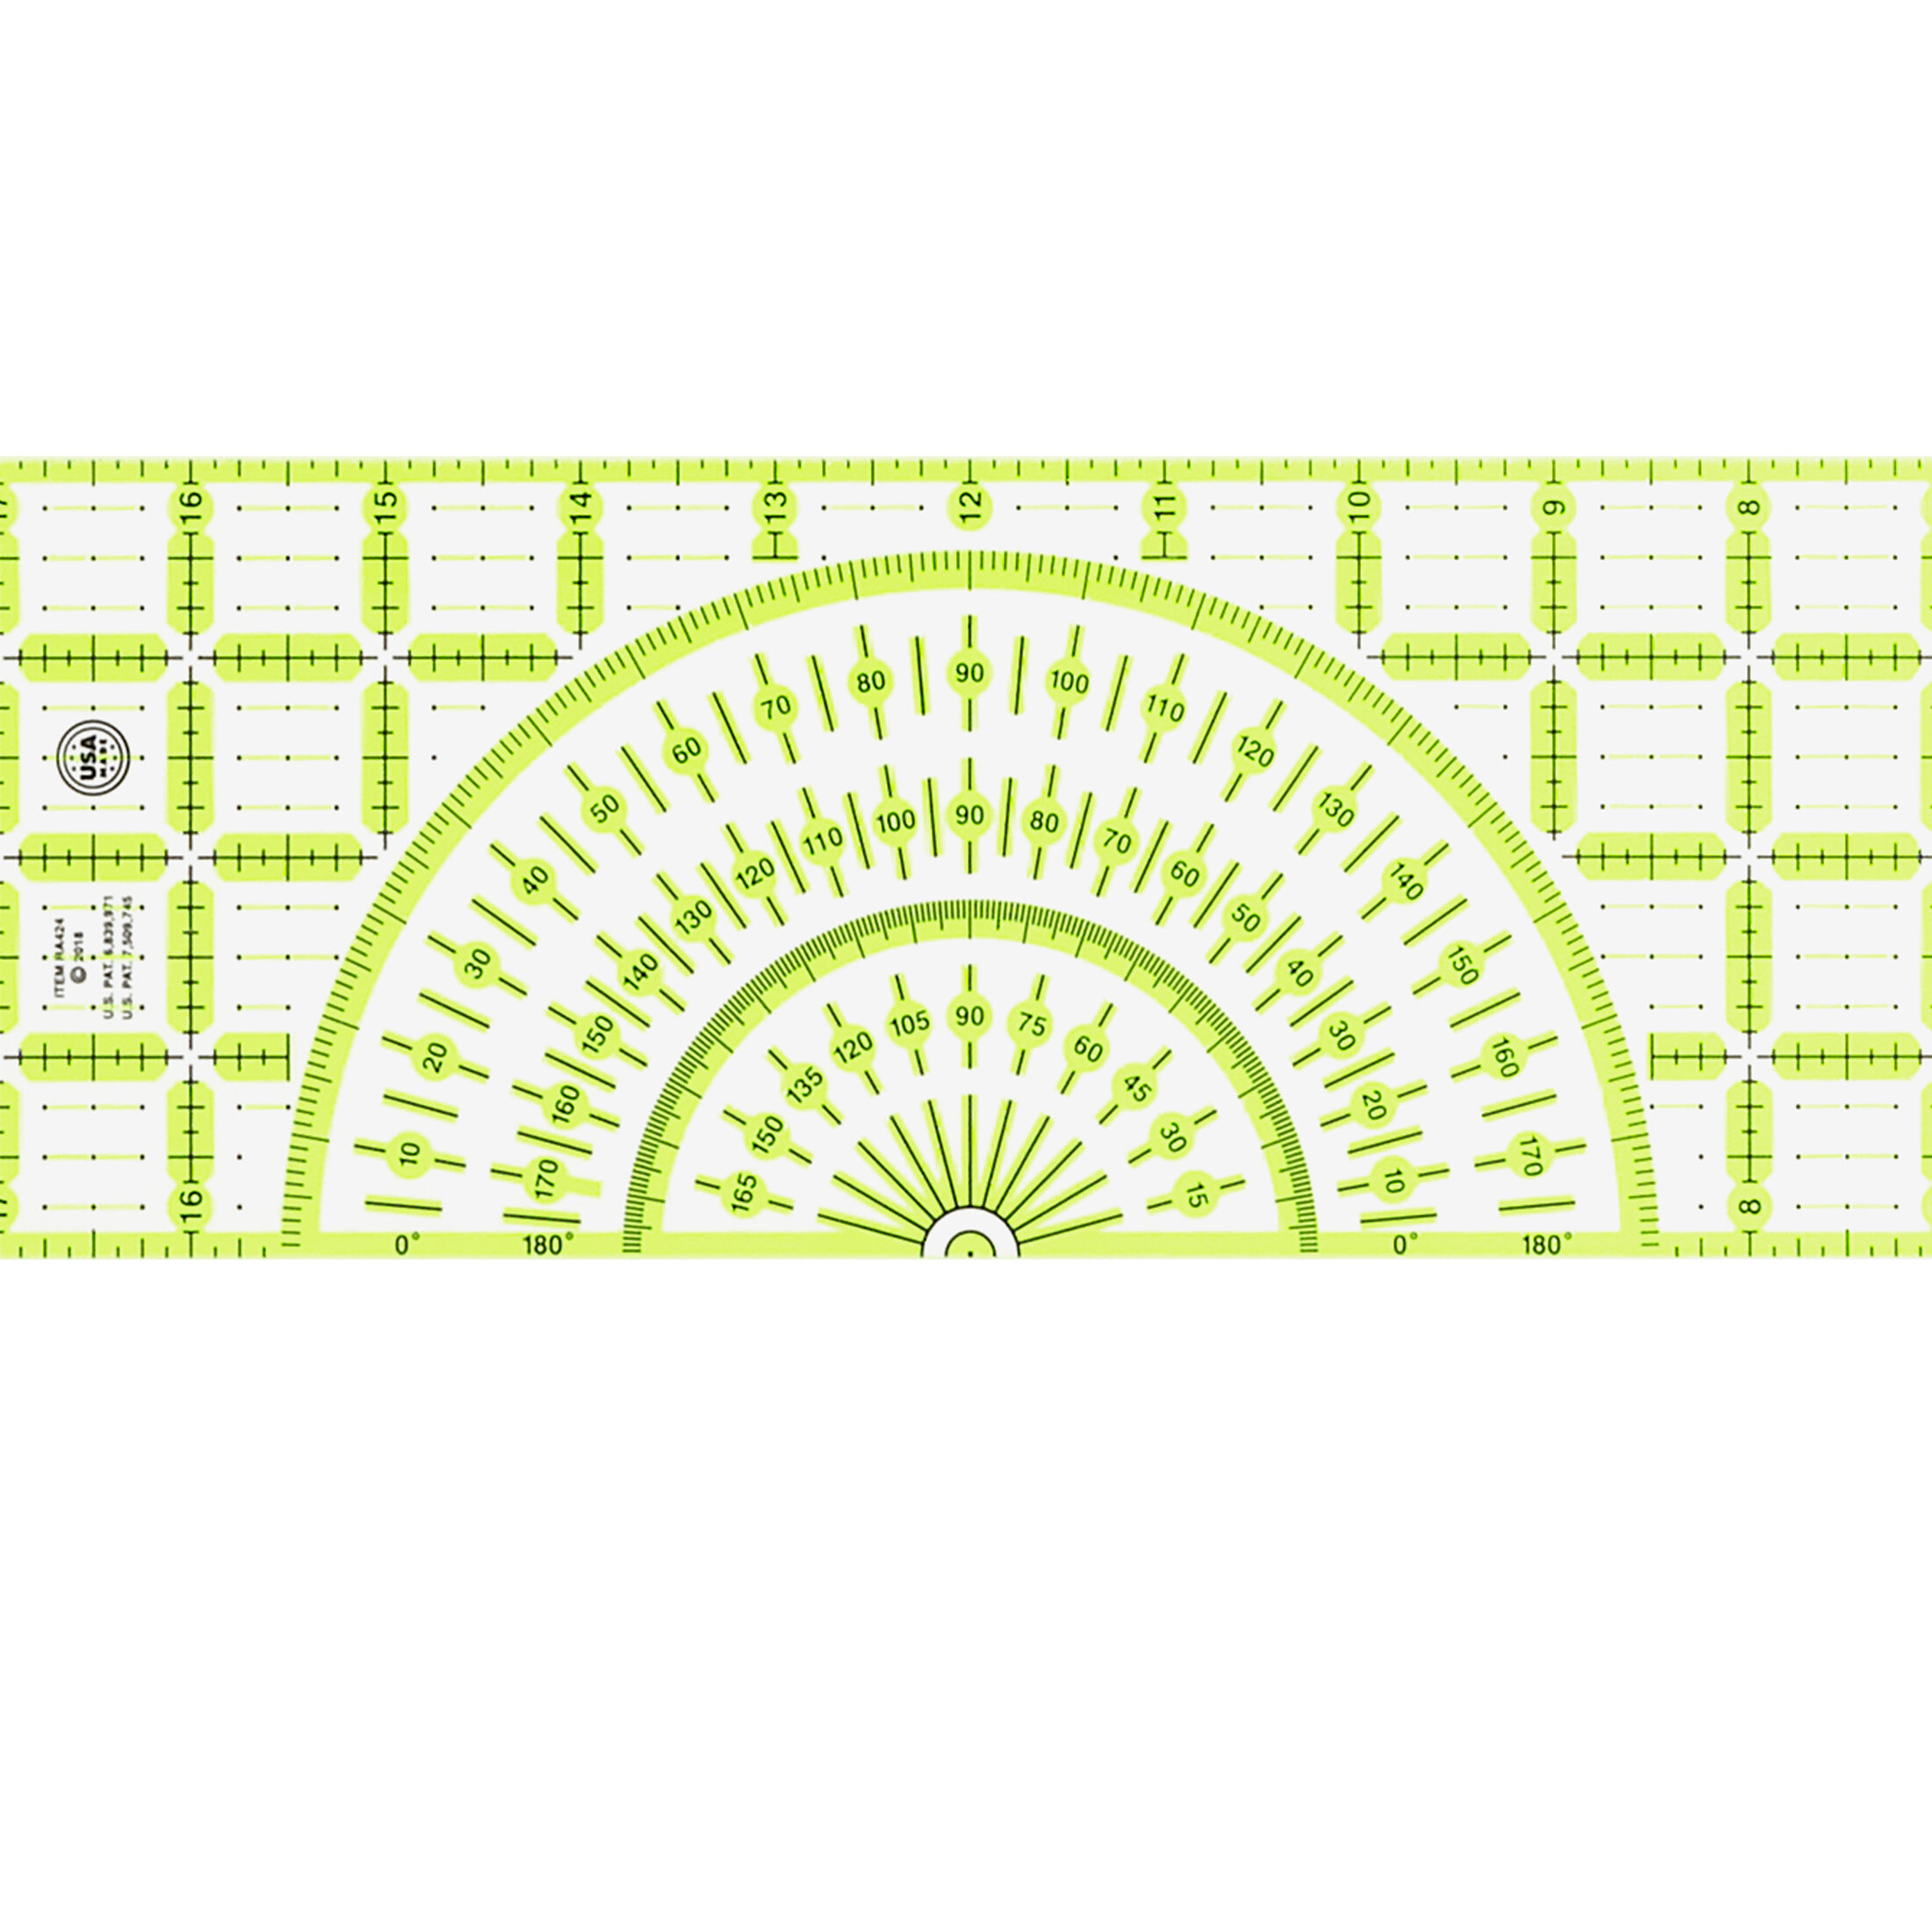 1/4 Acrylic Ruler Set - High Shank - Quilting-accessories Acccessory -  098612020004